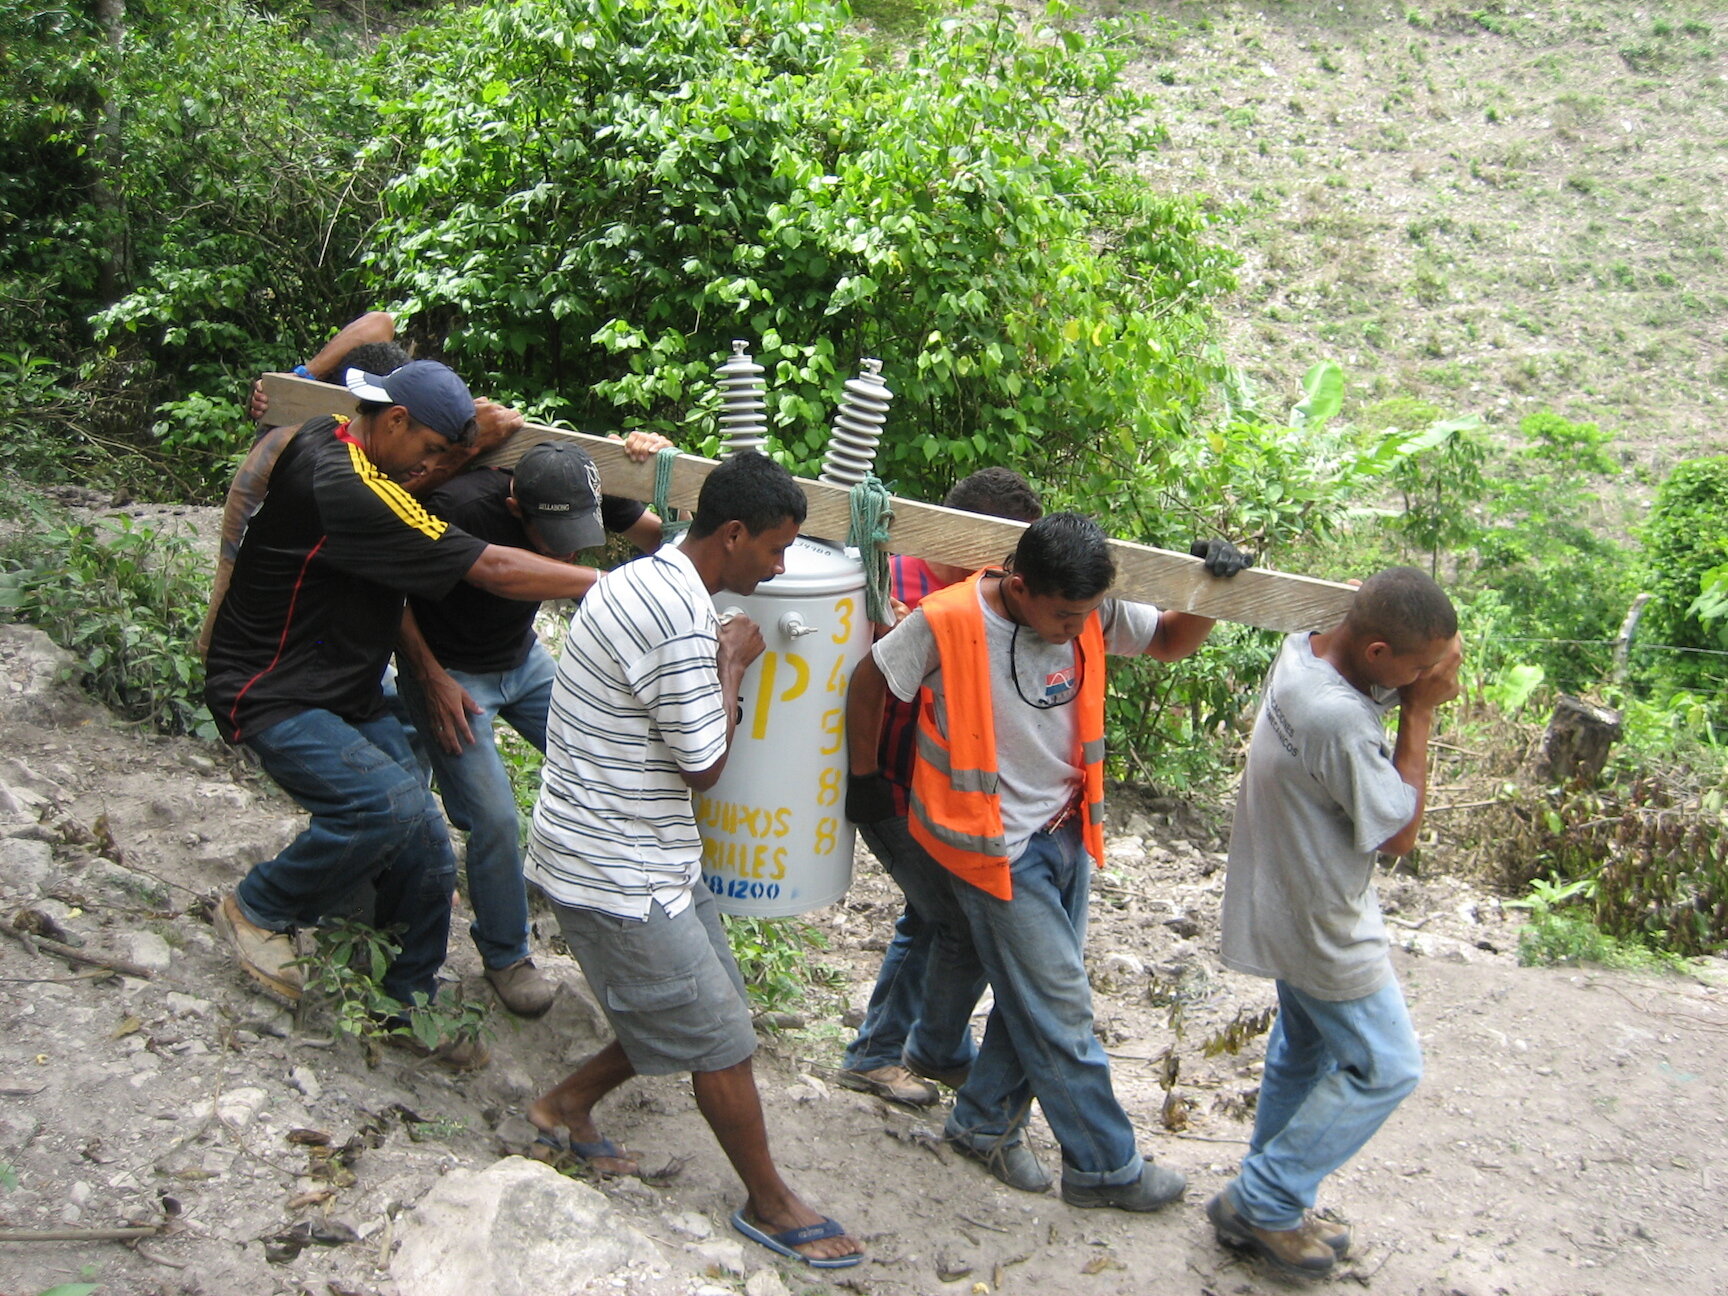 Communiity members team up to carry the electrical transformer to the water source.